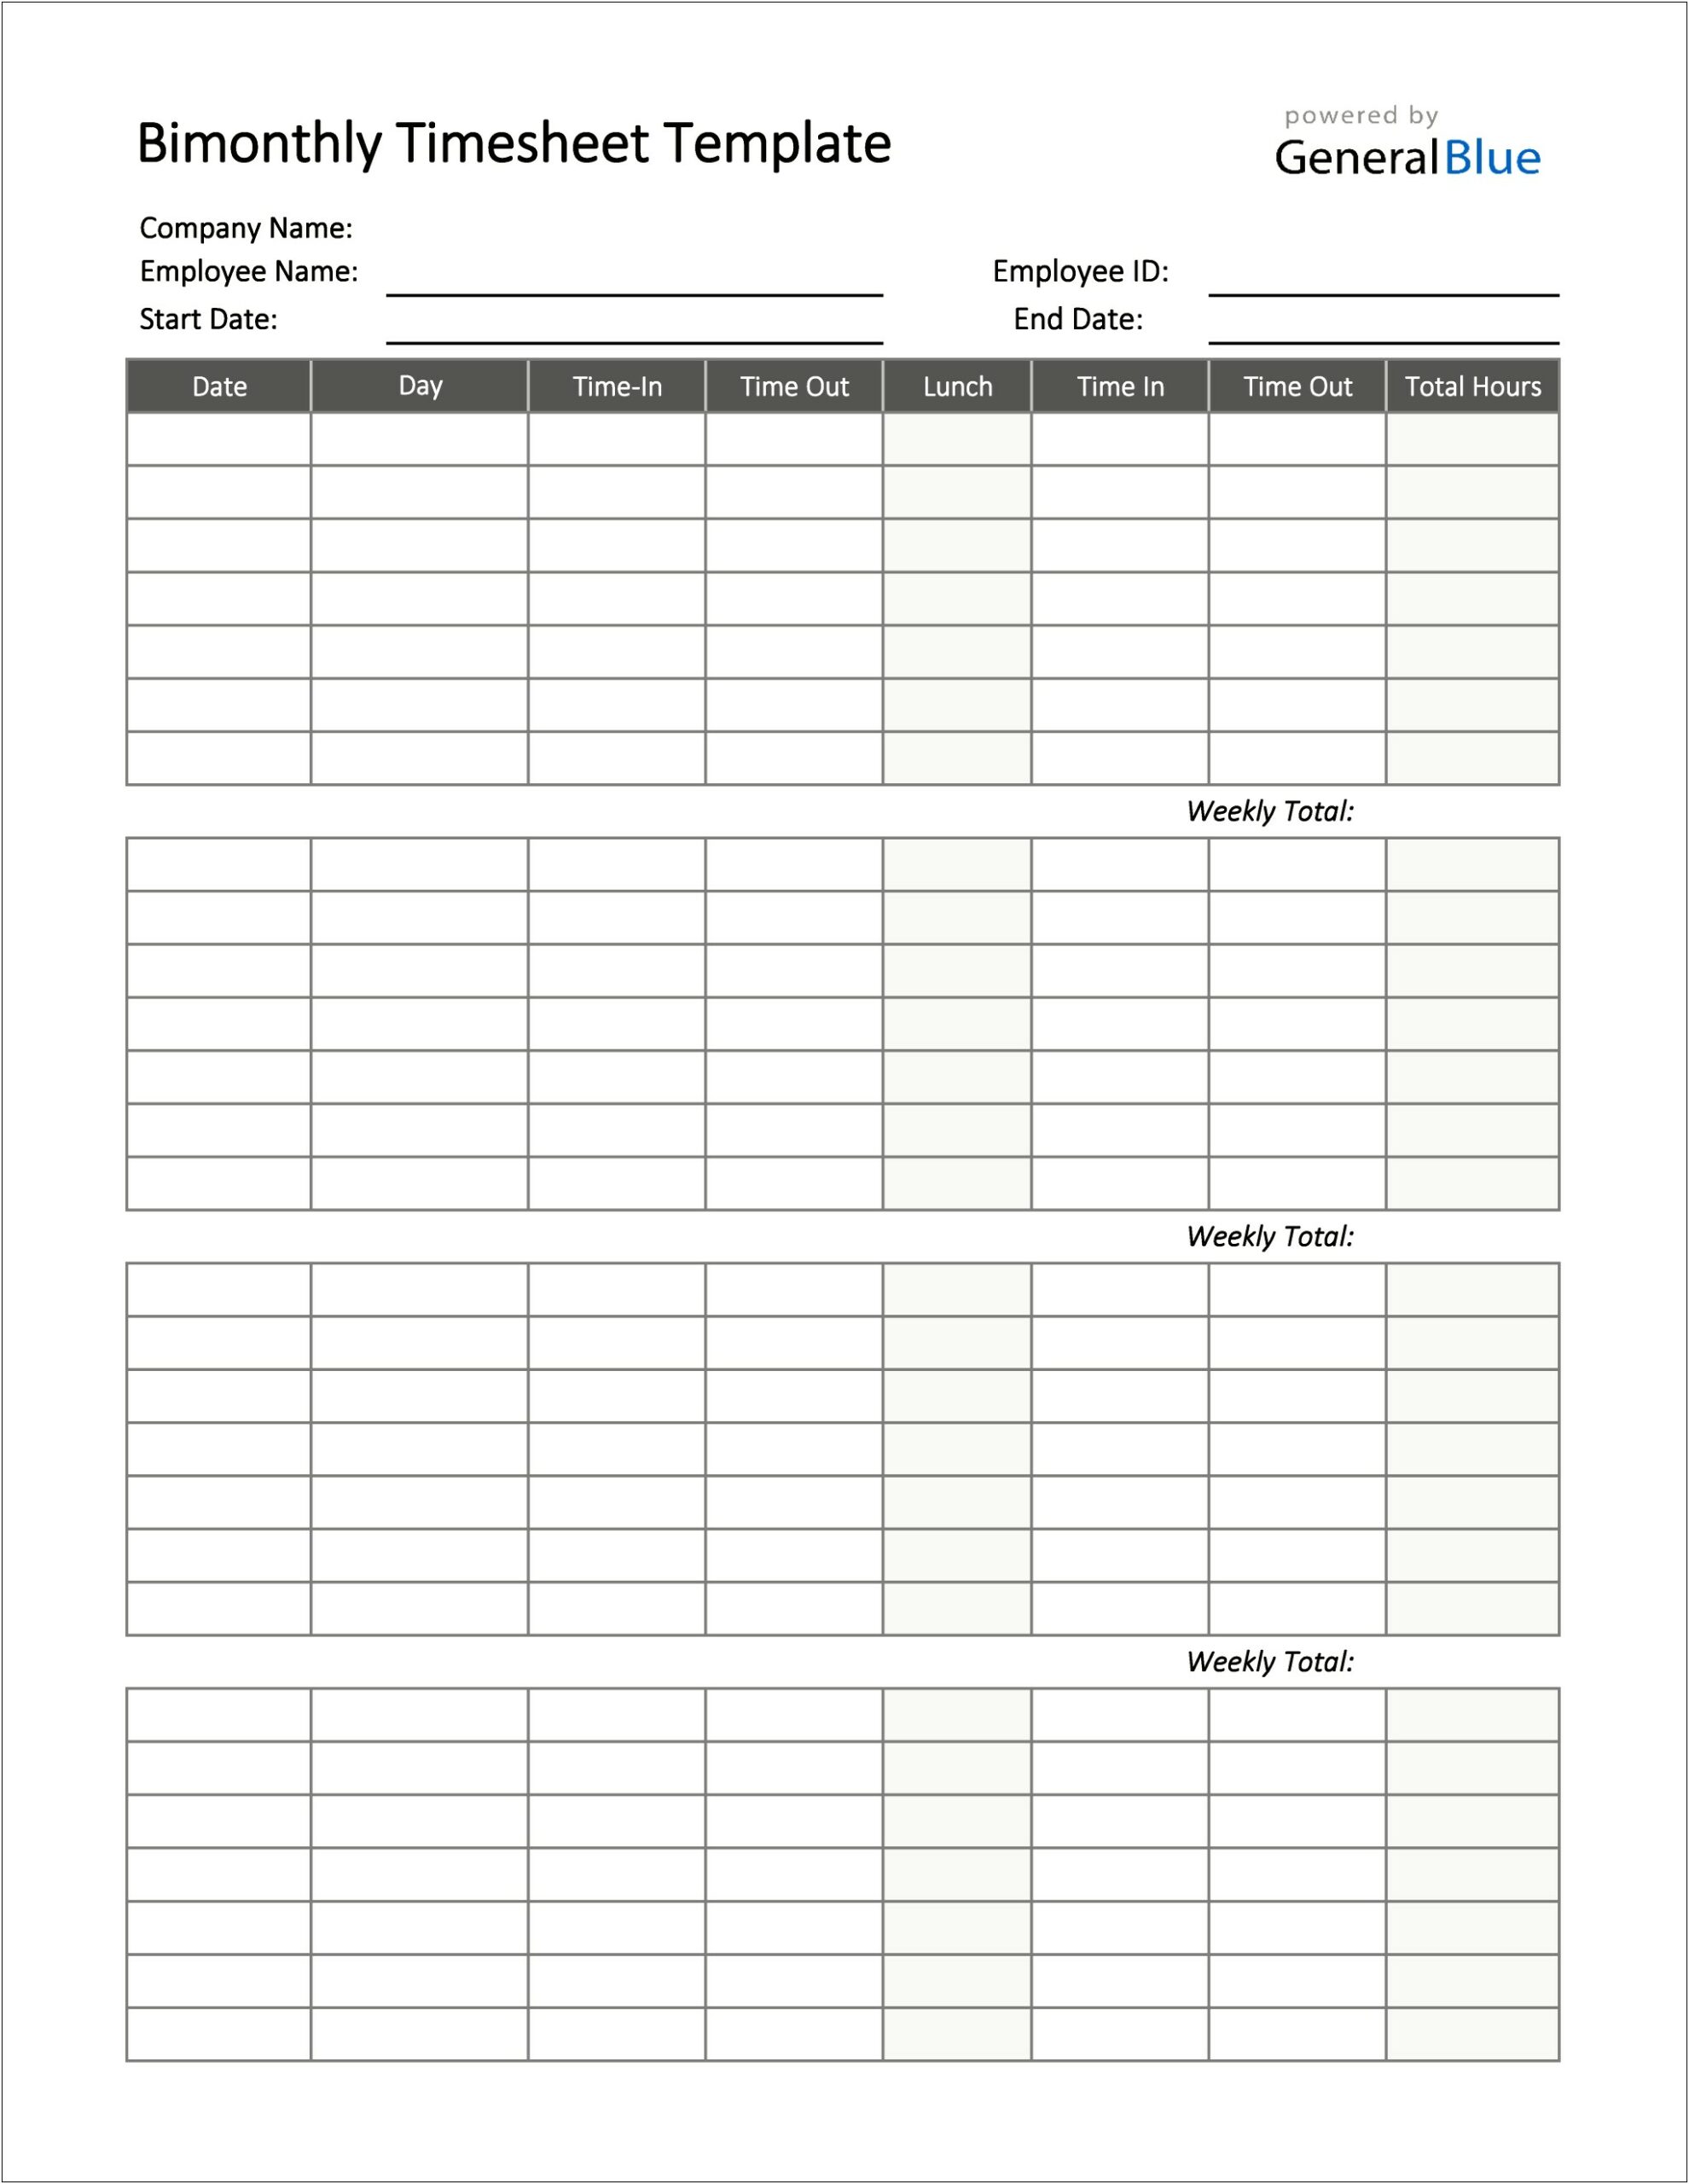 Monthly Biweekly Time Sheet Downloadable Template Free